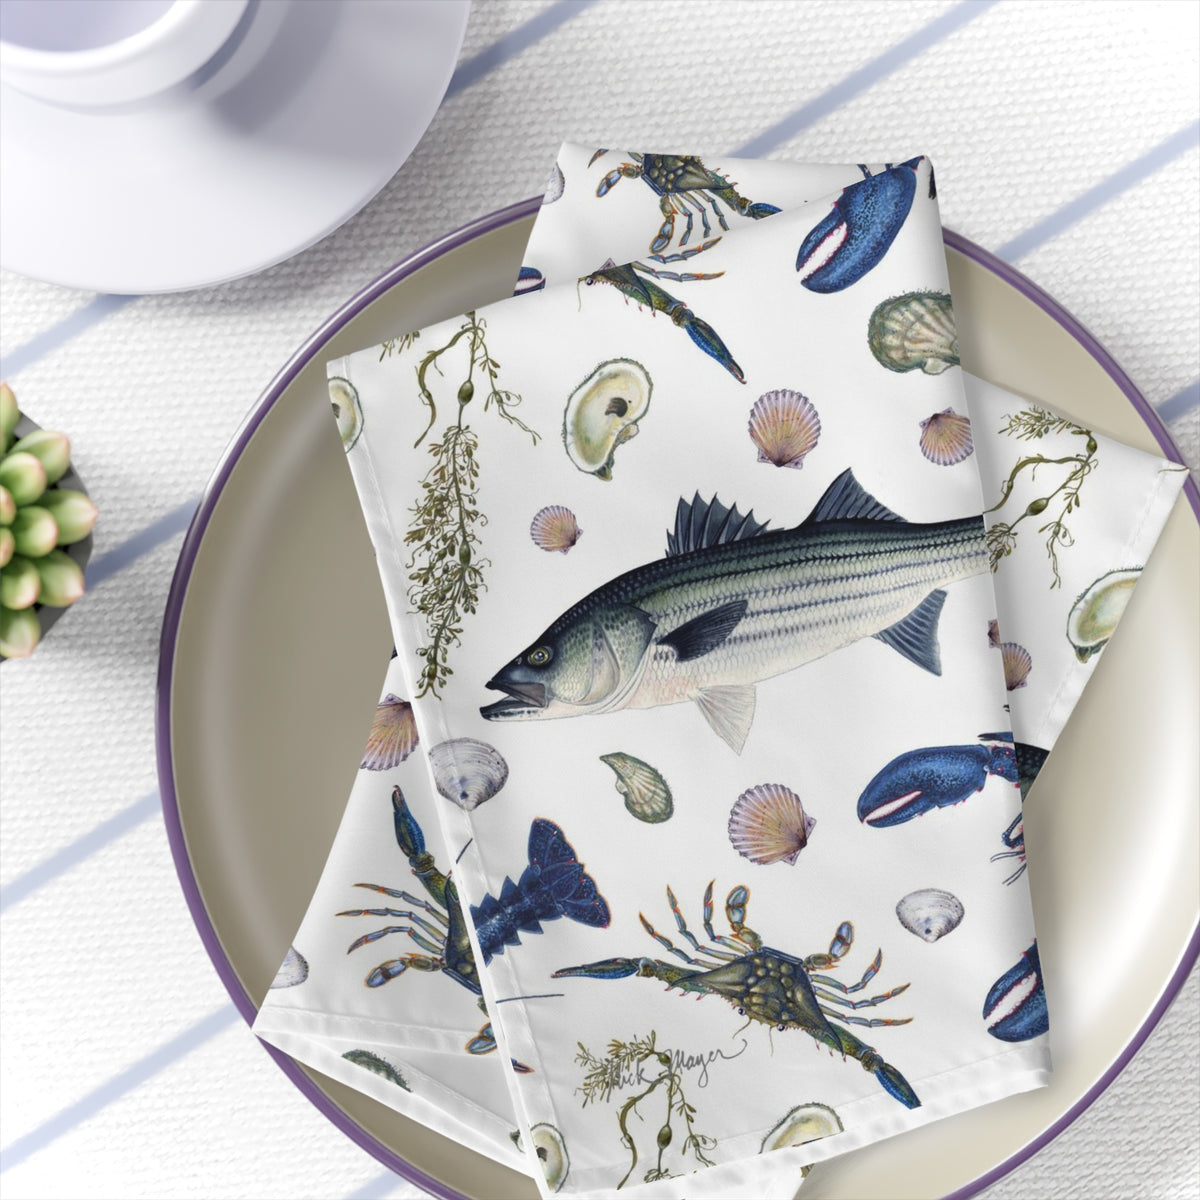 NE Seafood Kitchen Linens Bundle - Add to cart for 15% Off!